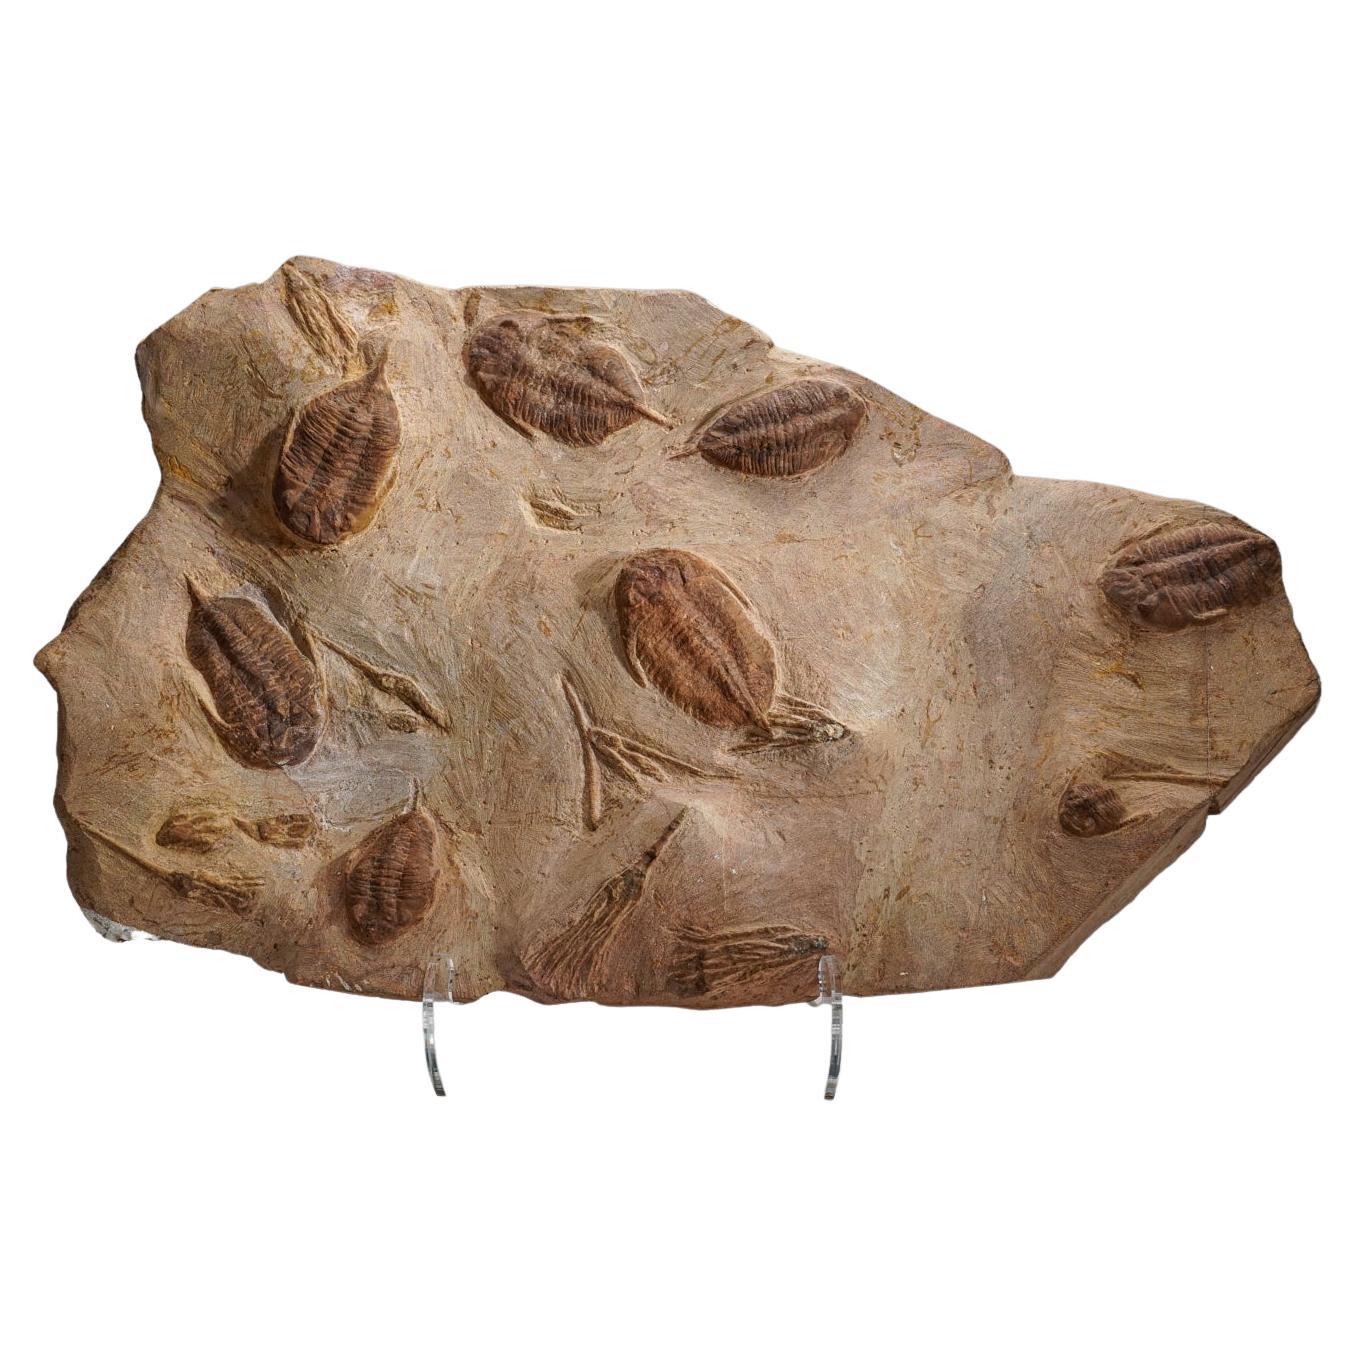 Cluster Trilobite Fossil on Matrix with Acrylic Display Stand  (18.5 lbs) For Sale